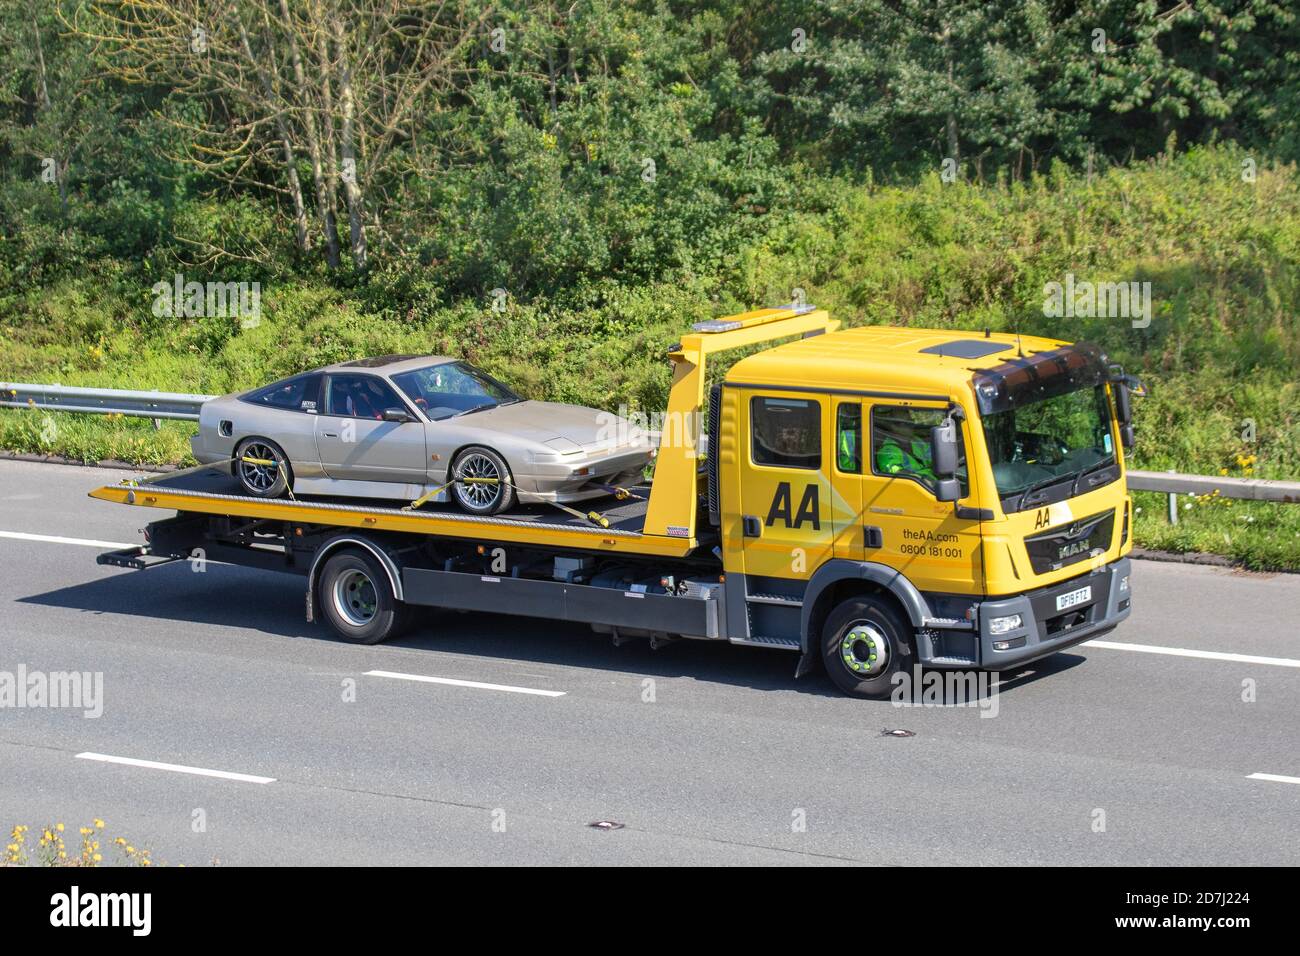 Partially restored Triumph TR7 classic car on AA car transporter. Roadside breakdown recovery;  Haulage delivery trucks, lorry, transportation, truck, vehicle delivery recoveries, commercial transport industry, on the M6 at Manchester, UK Stock Photo